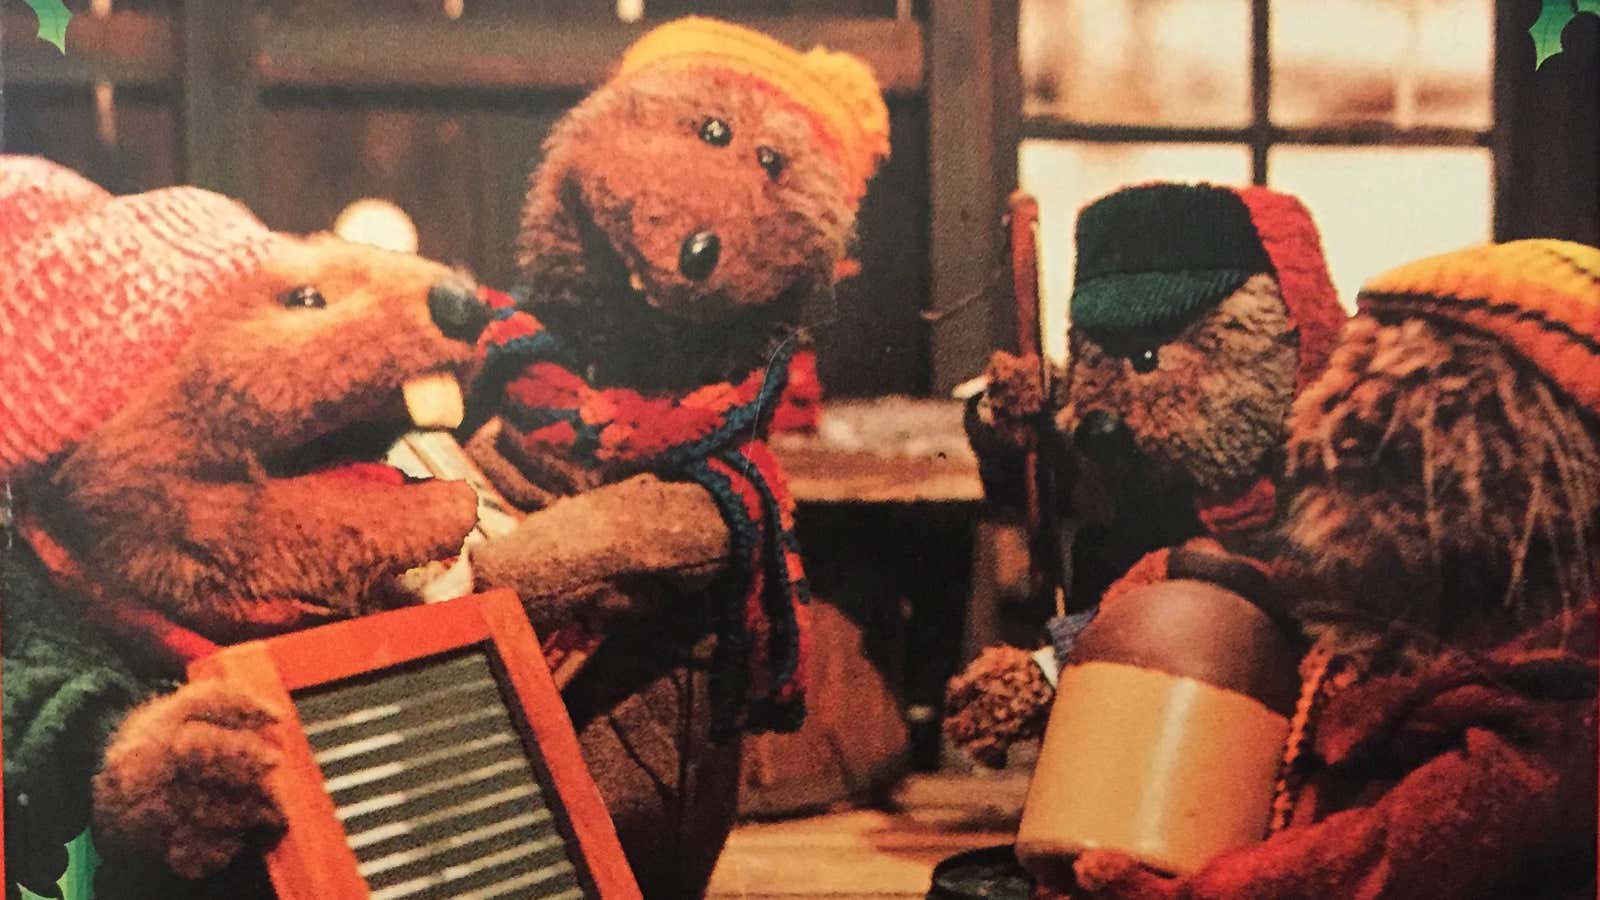 Emmet Otter, second from the right, with his Jug-Band.